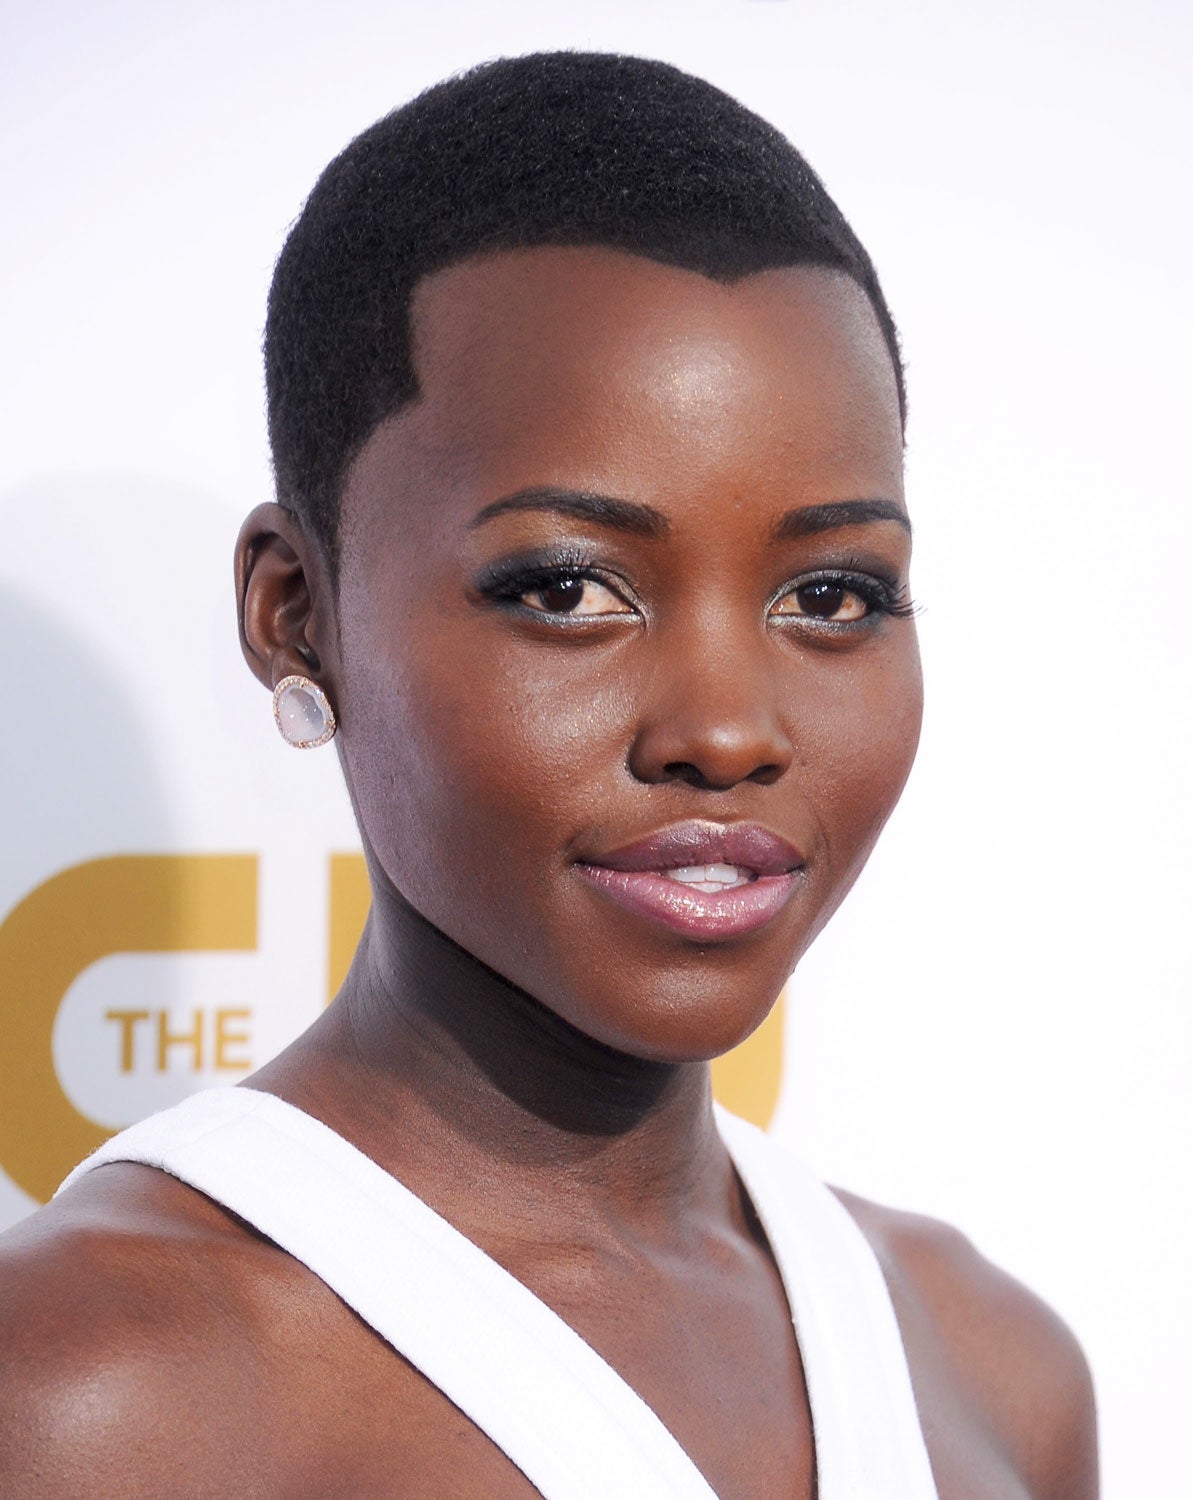 Lupita Nyong'o Shares a Holiday Poem with Her Instagram Fam
